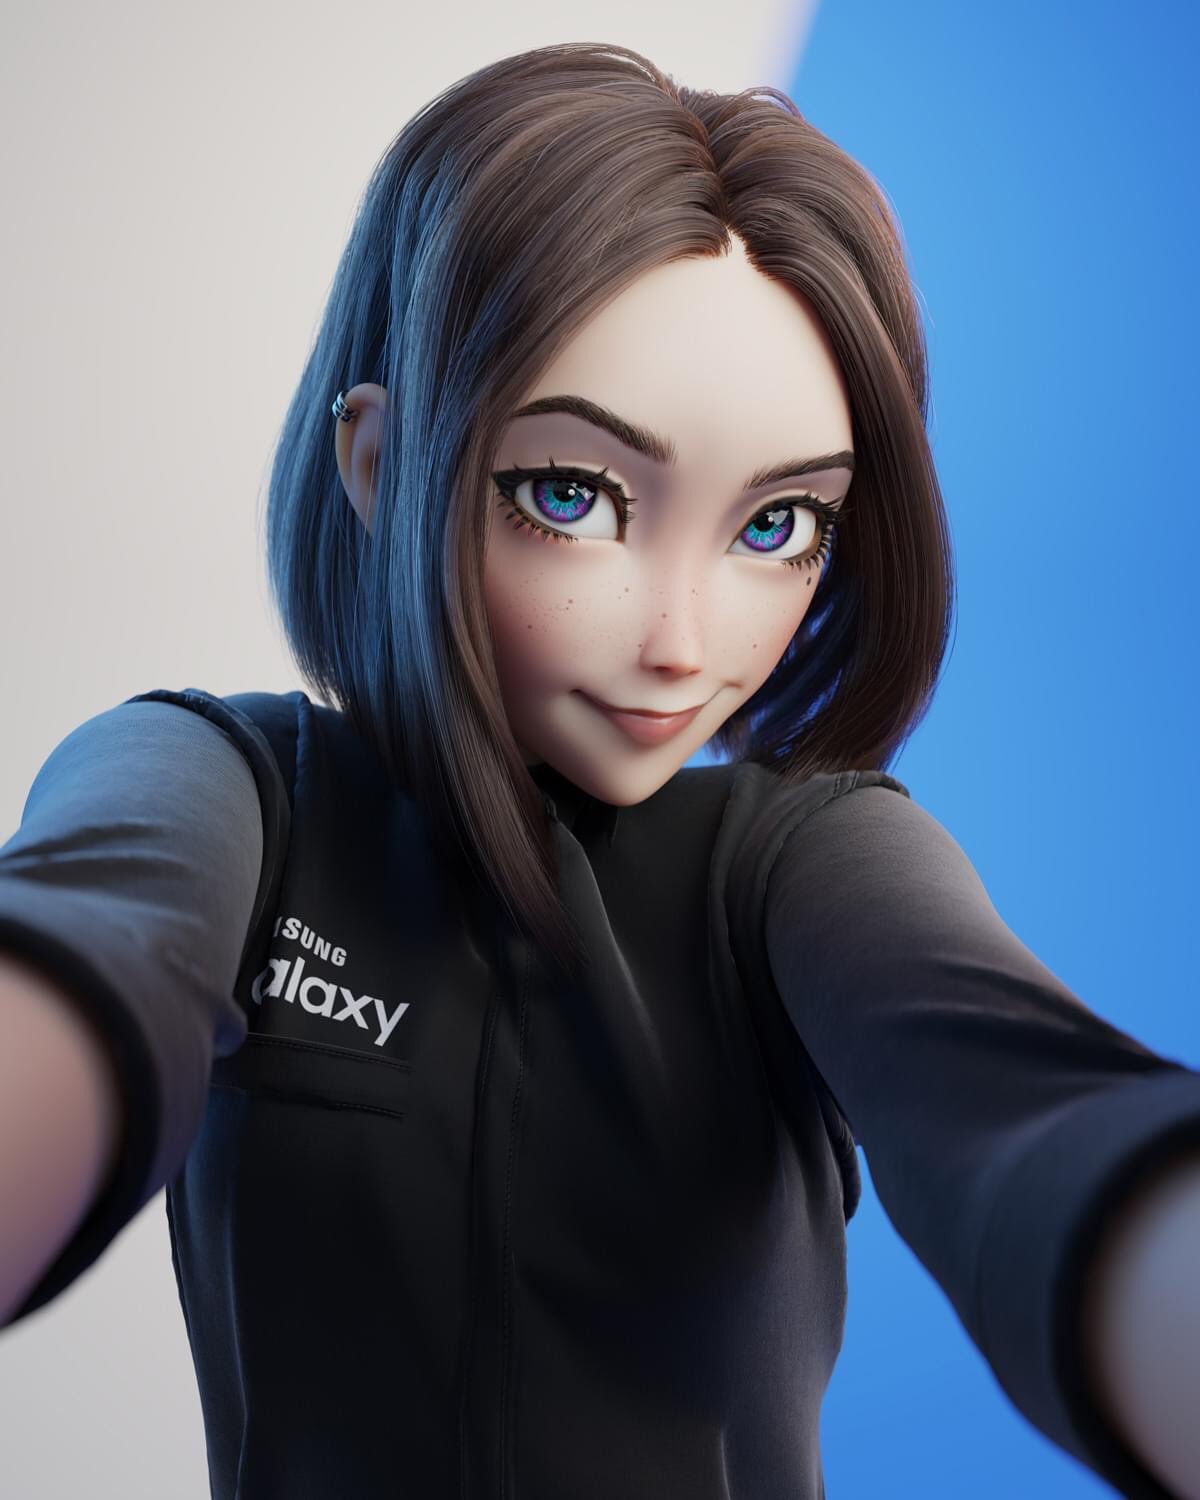 Noble Samsung Just Made A Hot Virtual Assistant Named Sam And In One Fell Swoop They Captured Every Weeb And R34 Artist T Co 2tliwgpcsb